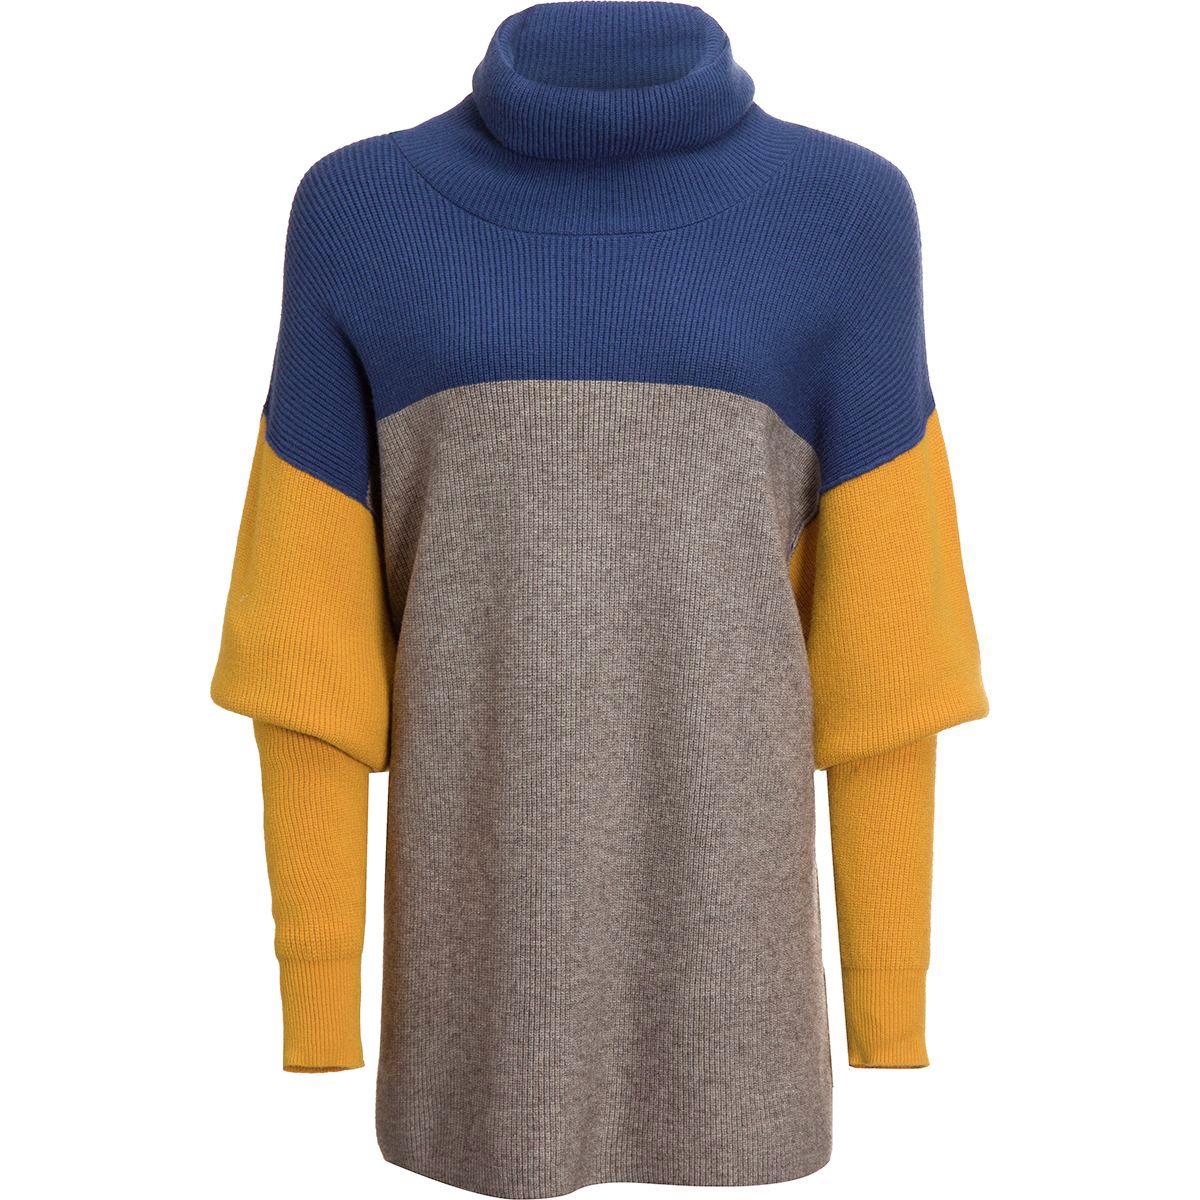 Free People Softly Structured Color Block Sweater - Women's - Clothing